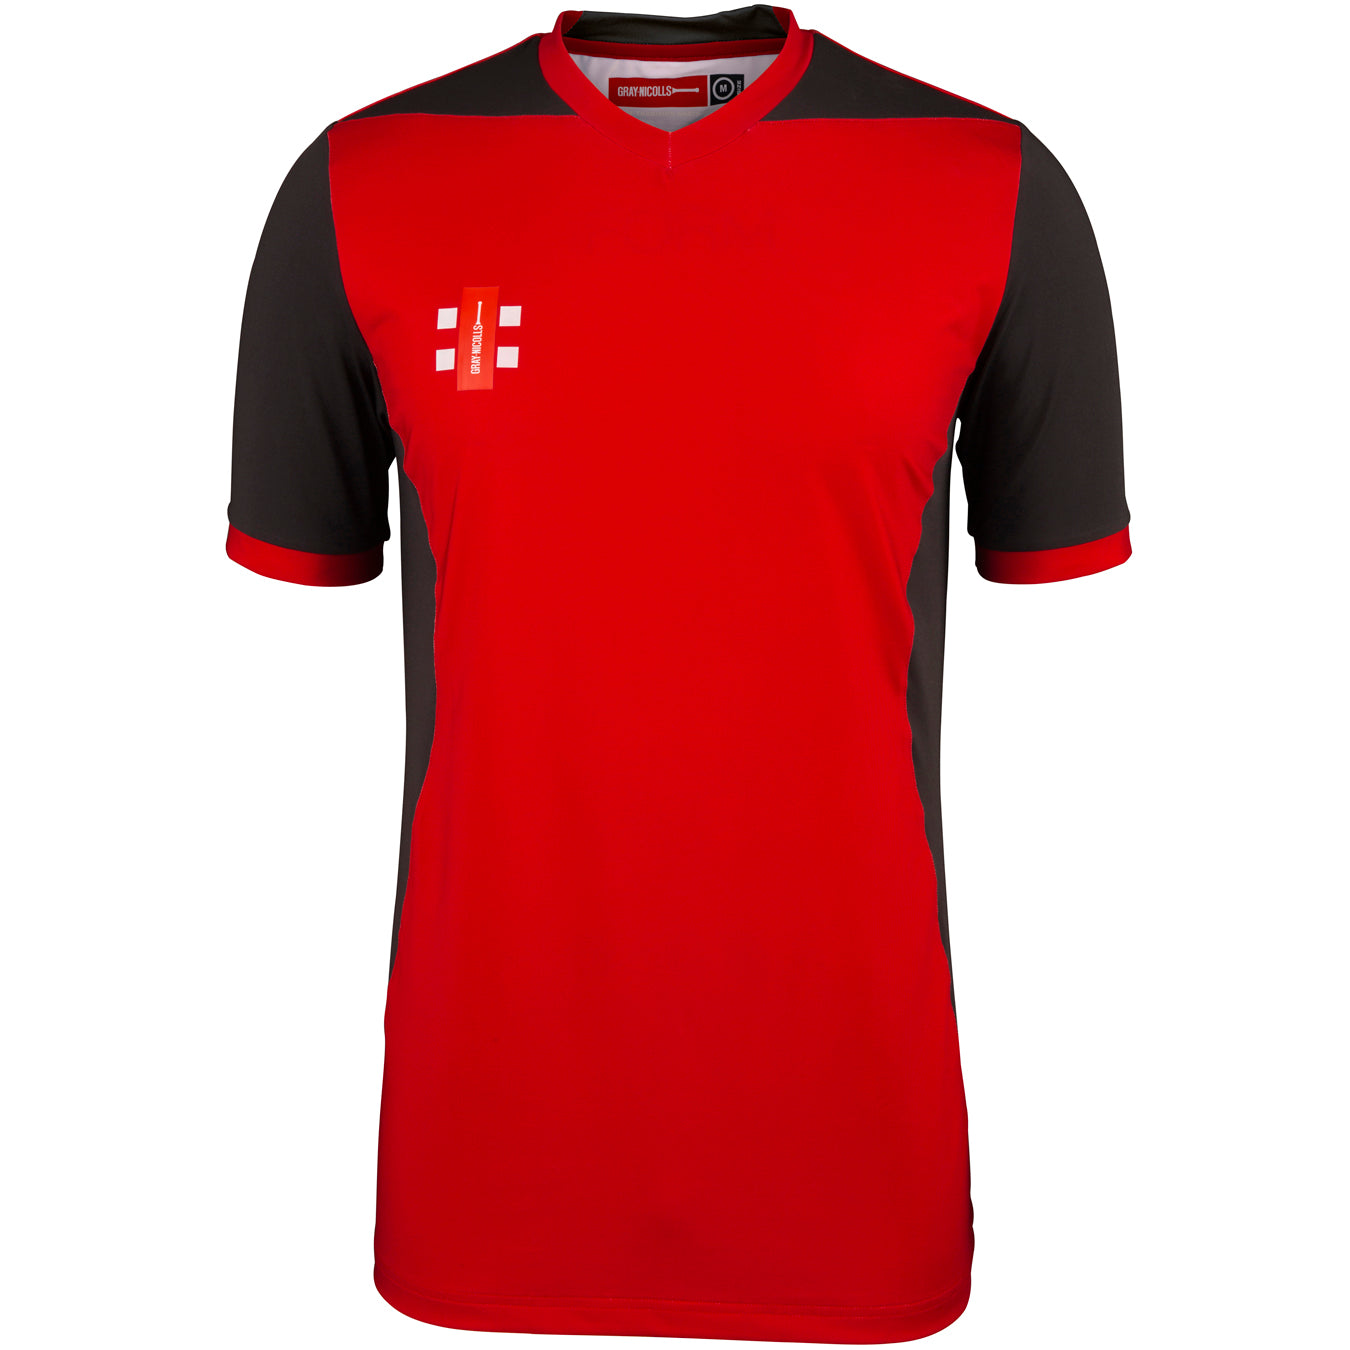 CCFB18Shirt T20 Red_black, Front